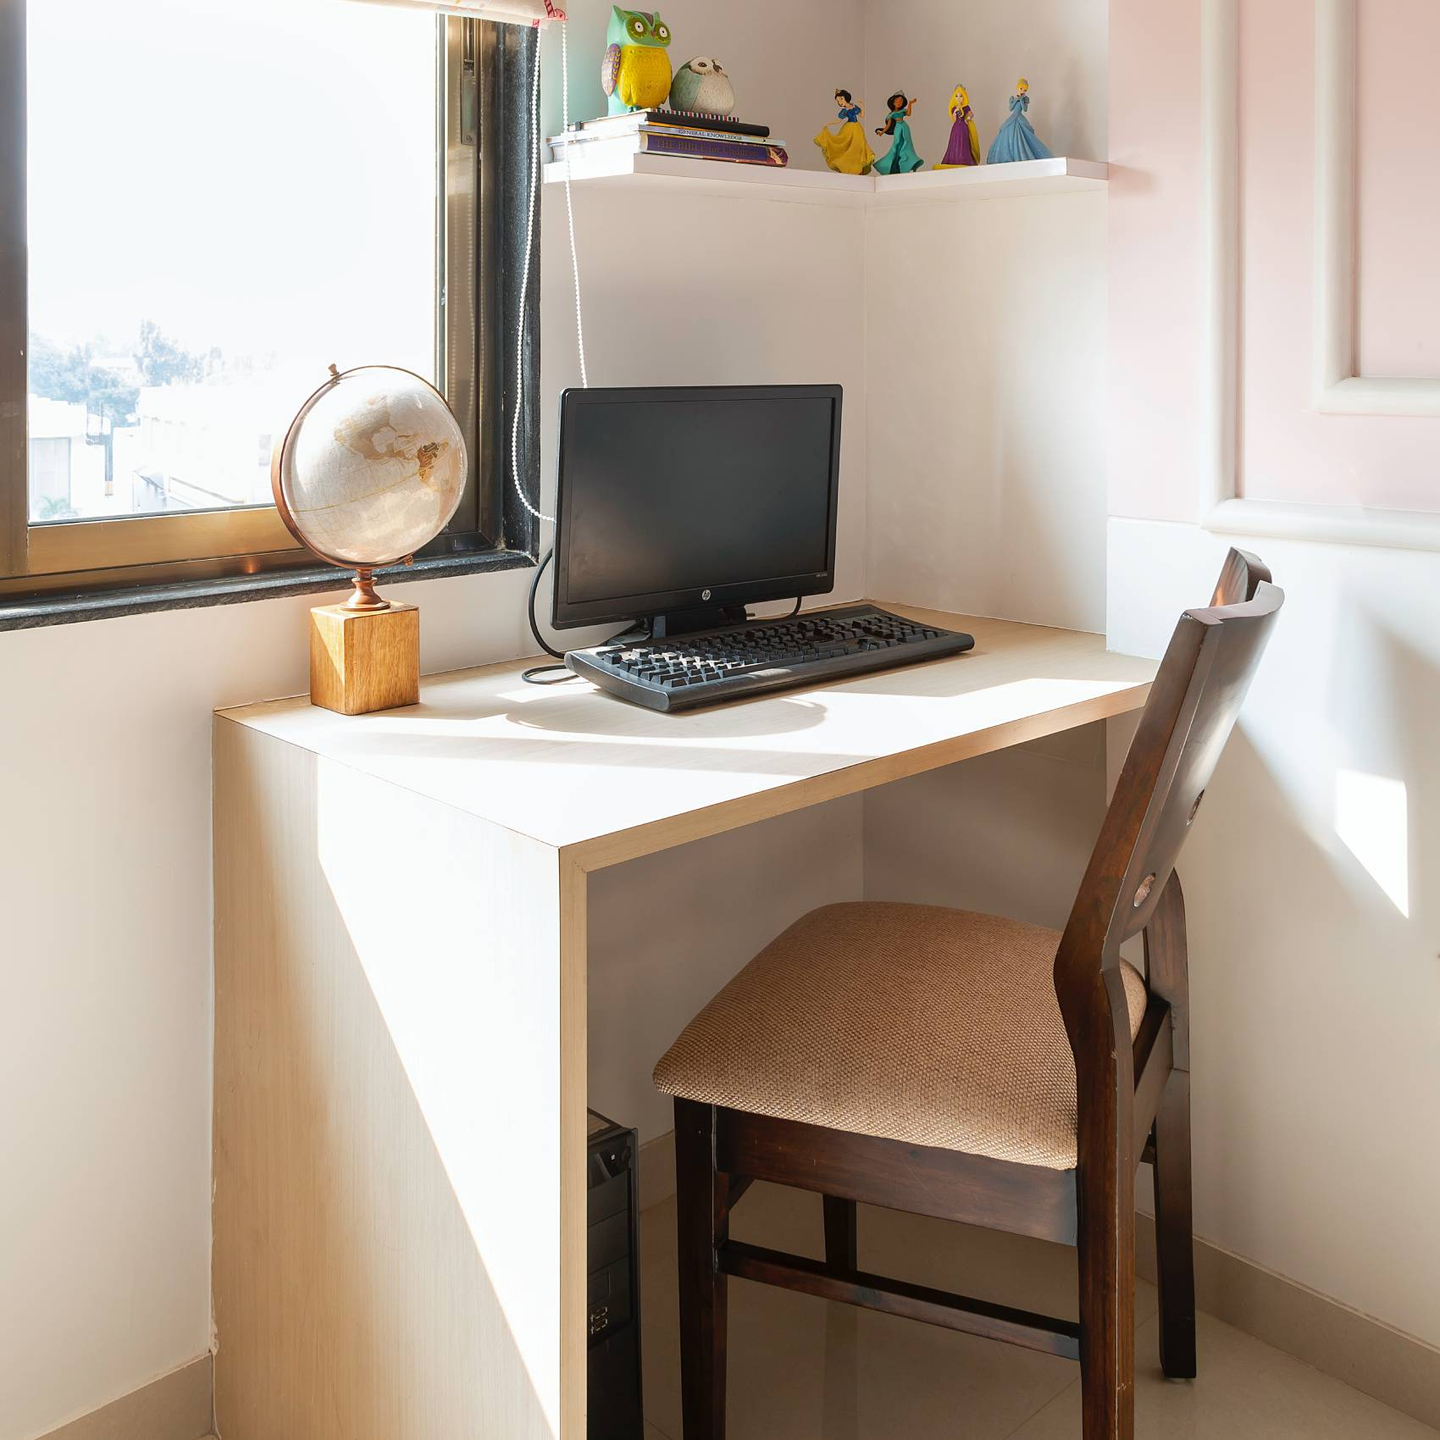 Compact Home Office With A Window-Facing Setup - Livspace